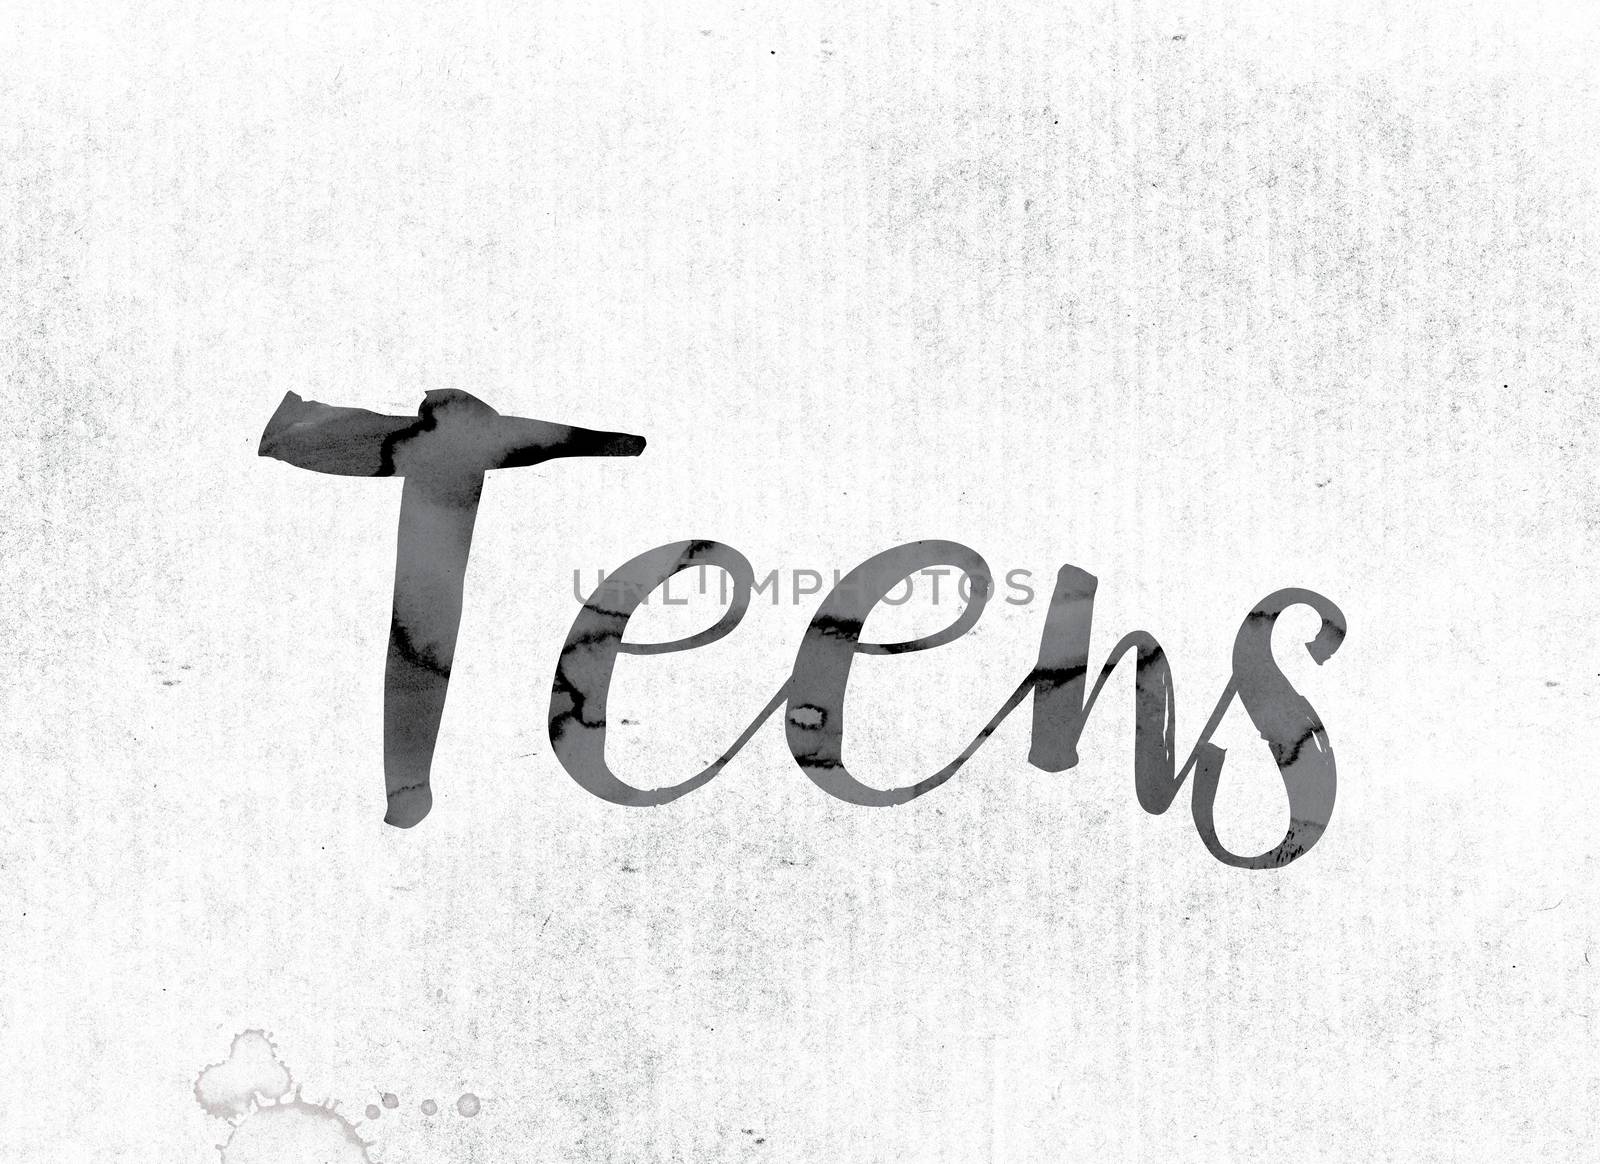 The word "Teens" concept and theme painted in watercolor ink on a white paper.